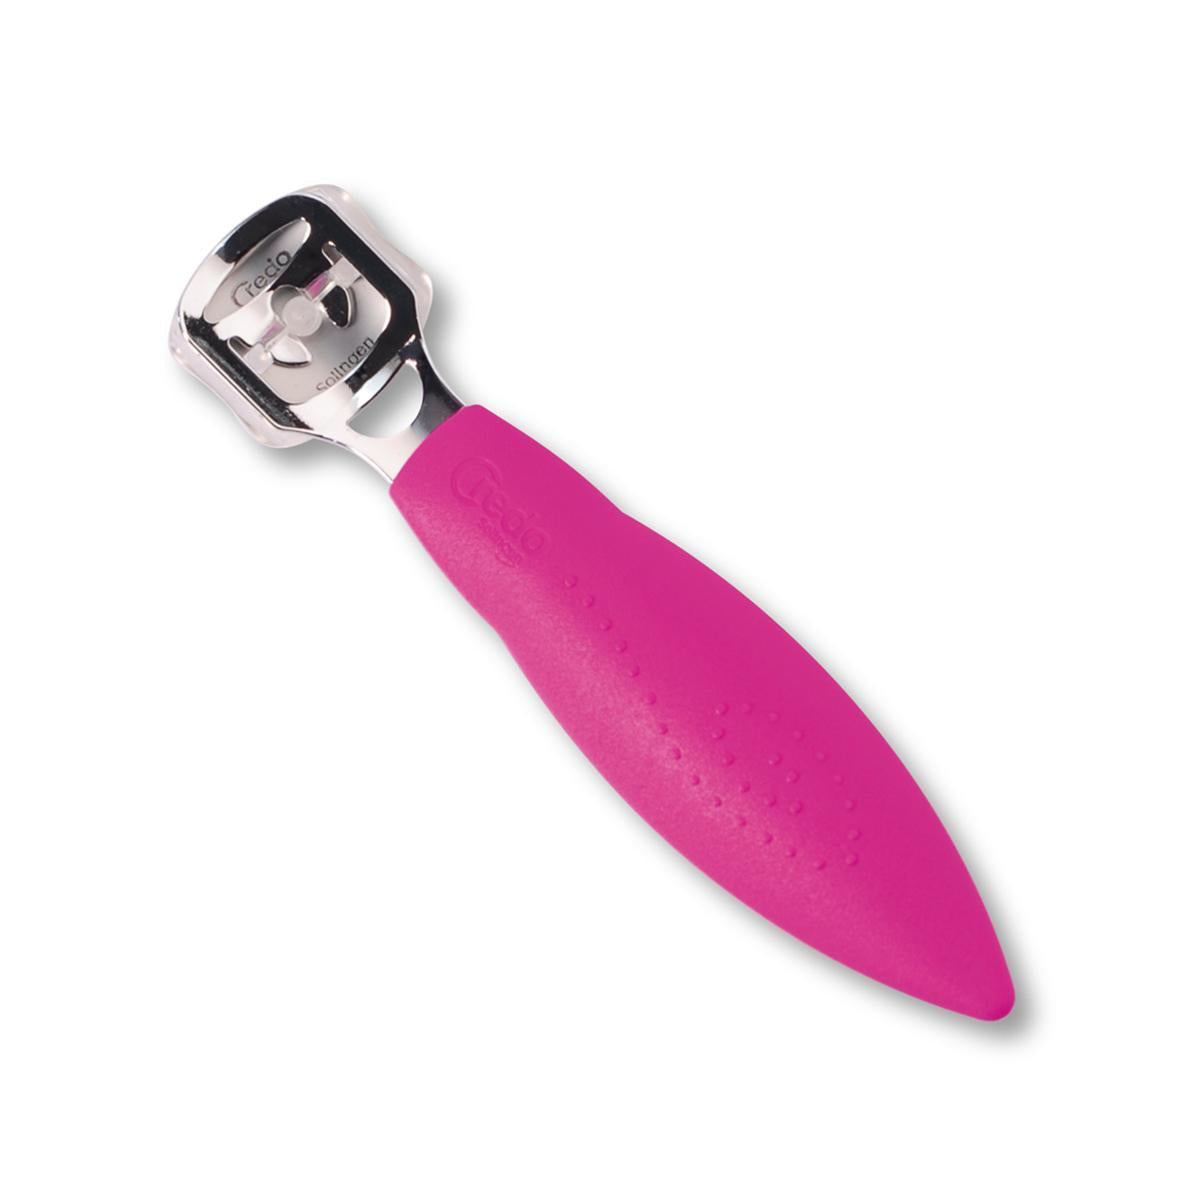 Primary image of Pink Pop Art Safety Corn Cutter